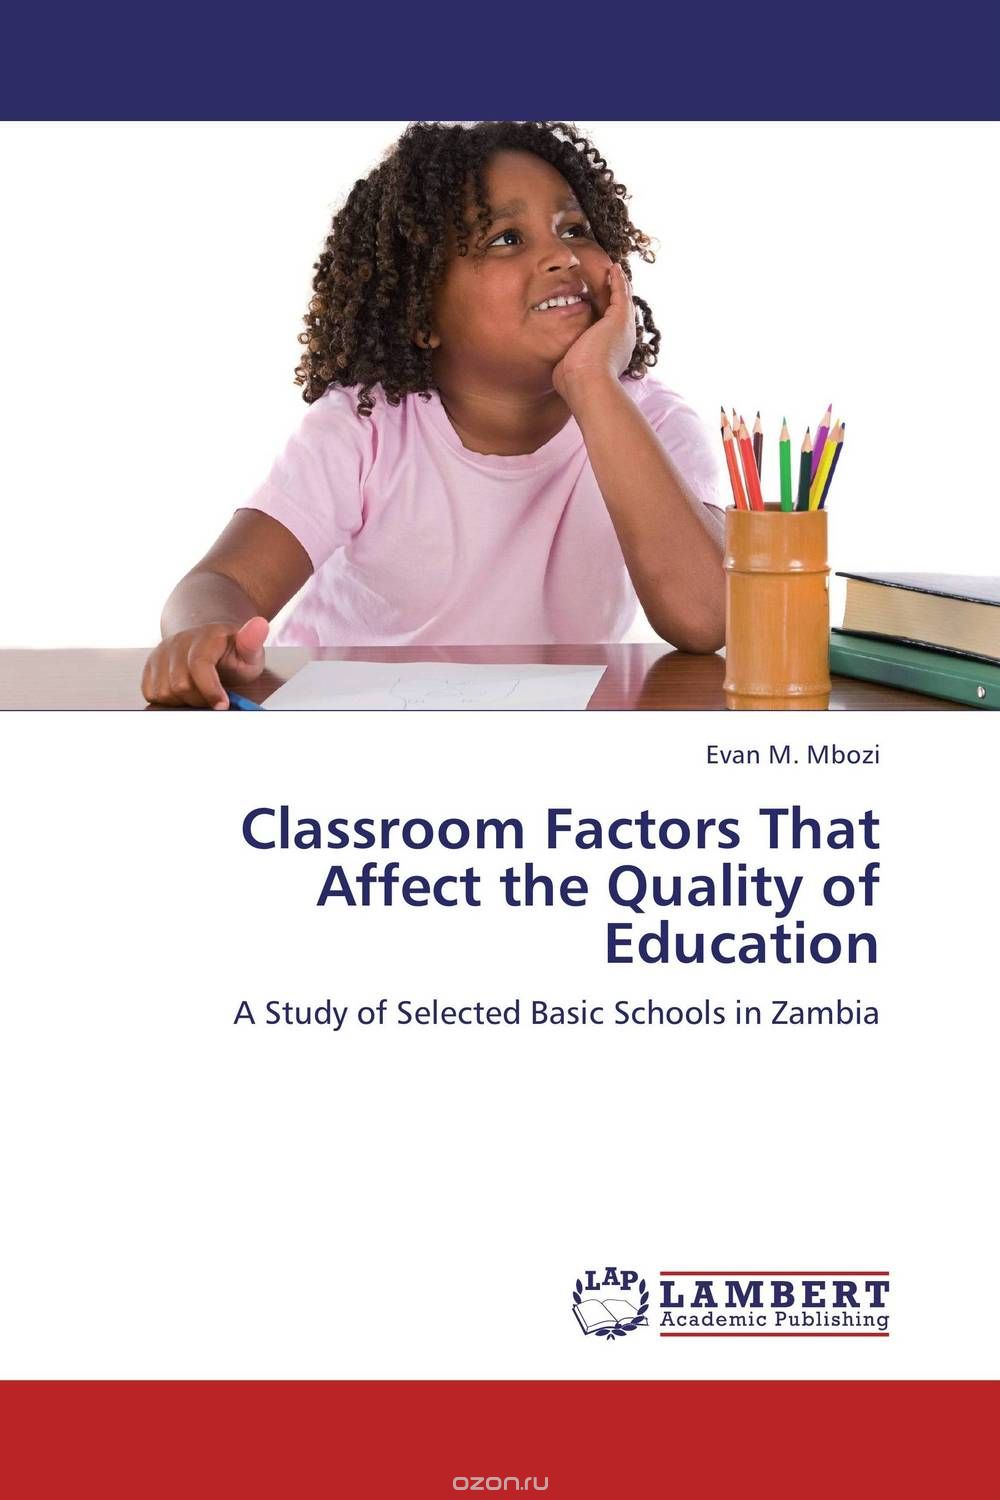 Classroom Factors That Affect the Quality of Education